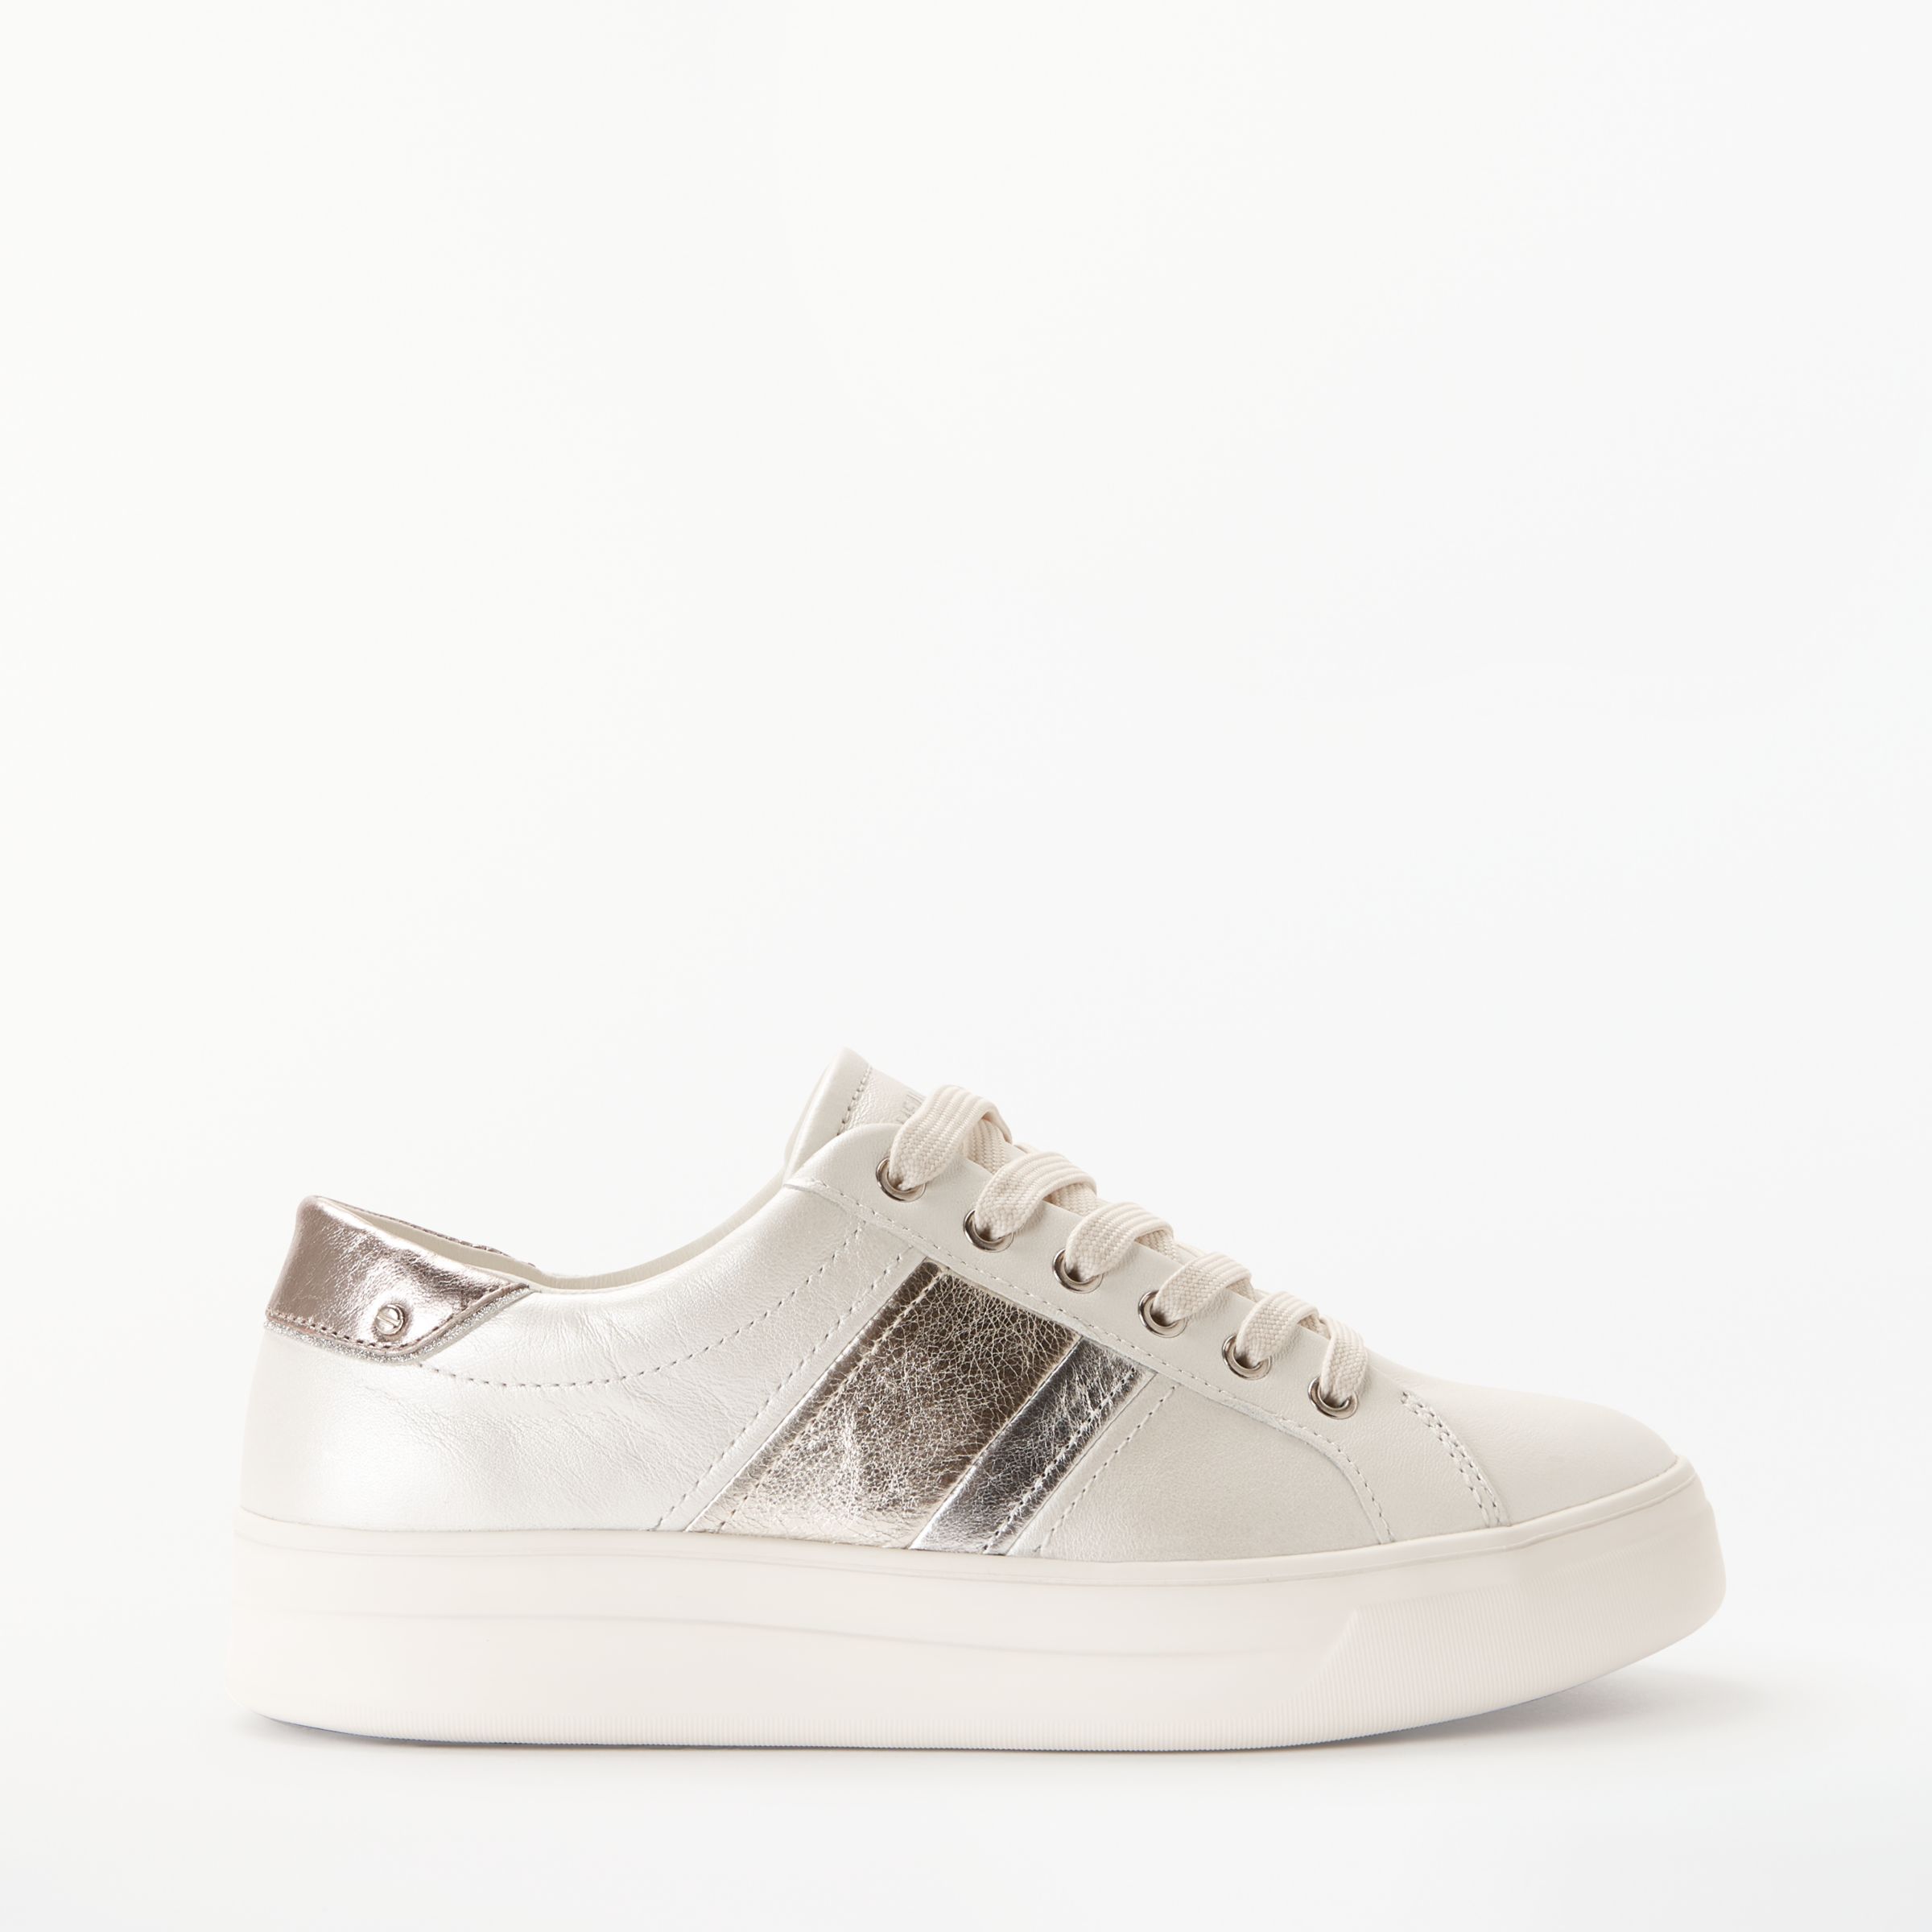 Crime London Fierce Band Trainers, White/Silver